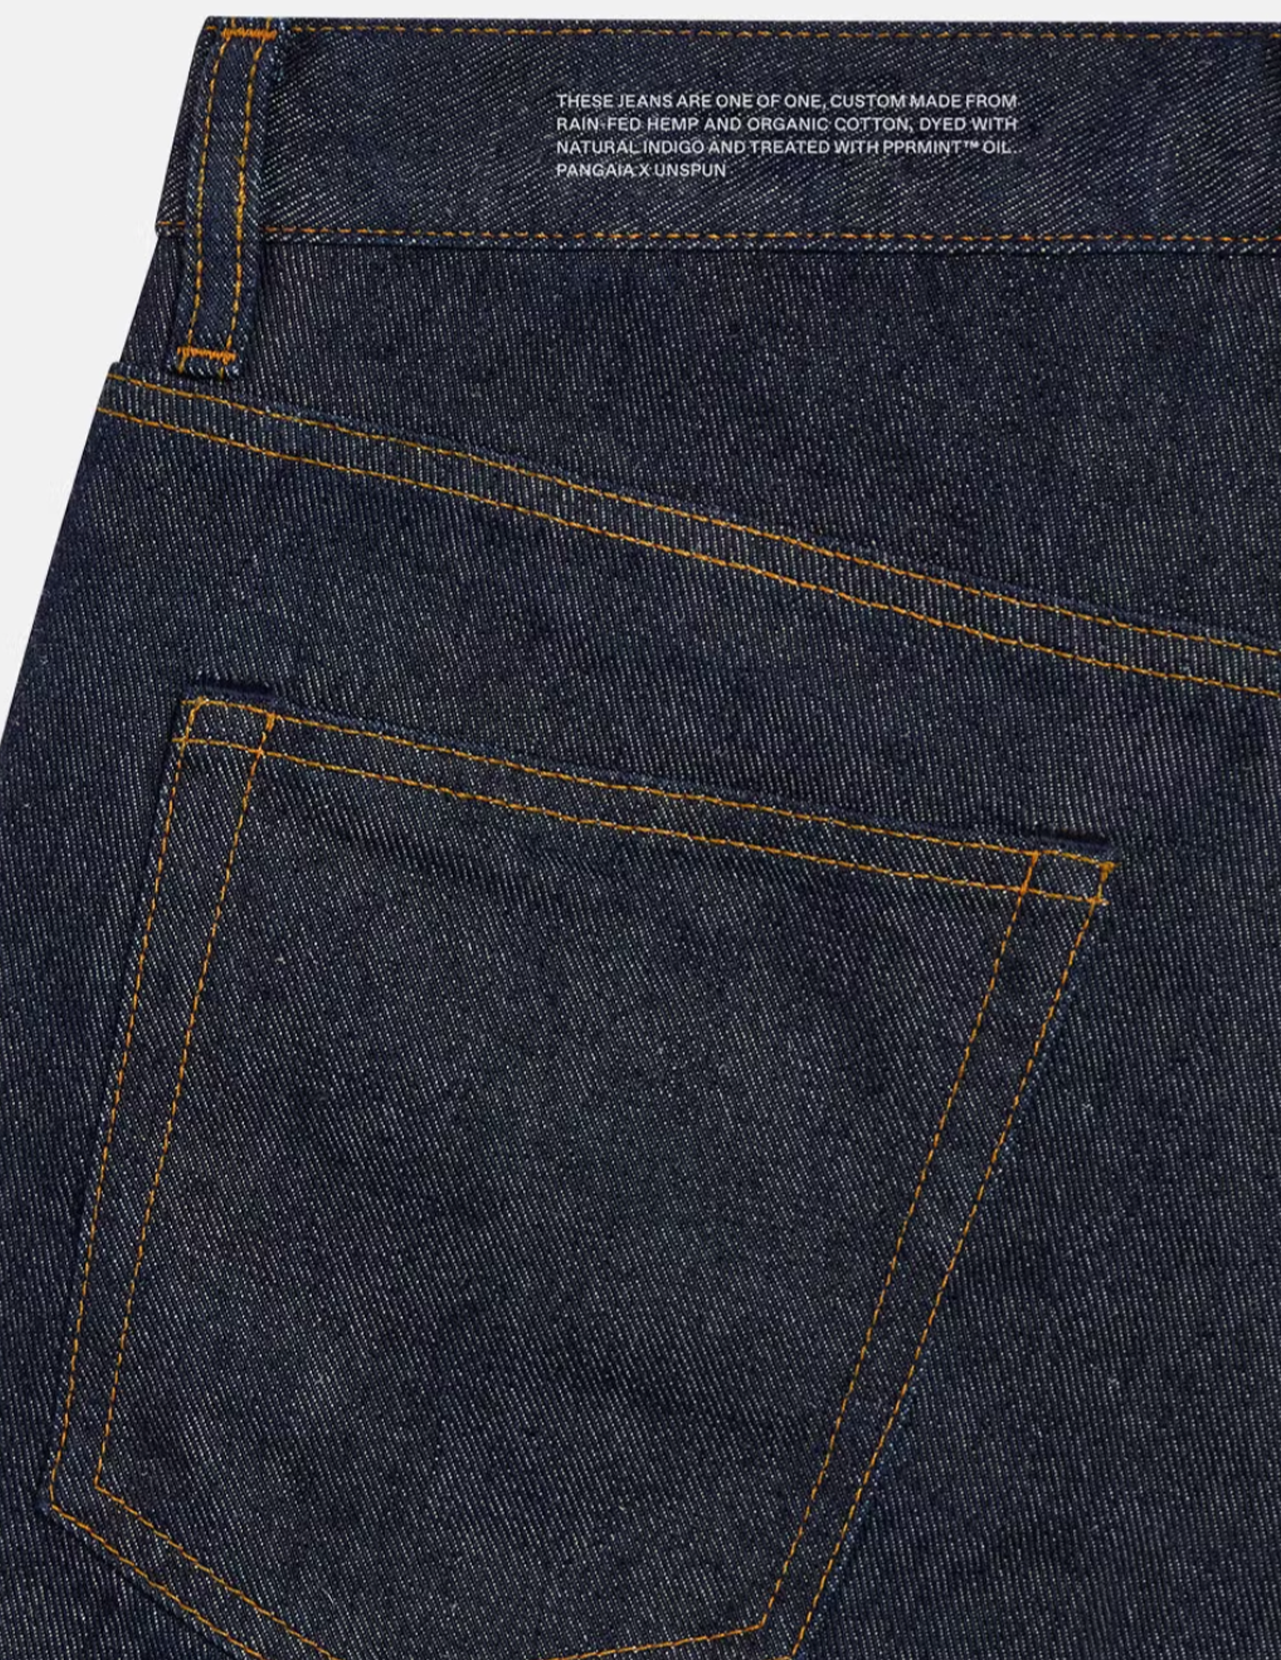 A pair of jeans made with PANhemp™ denim in rinse wash features Pangaia’s signature text block, which imparts the plant-based materials composing it.